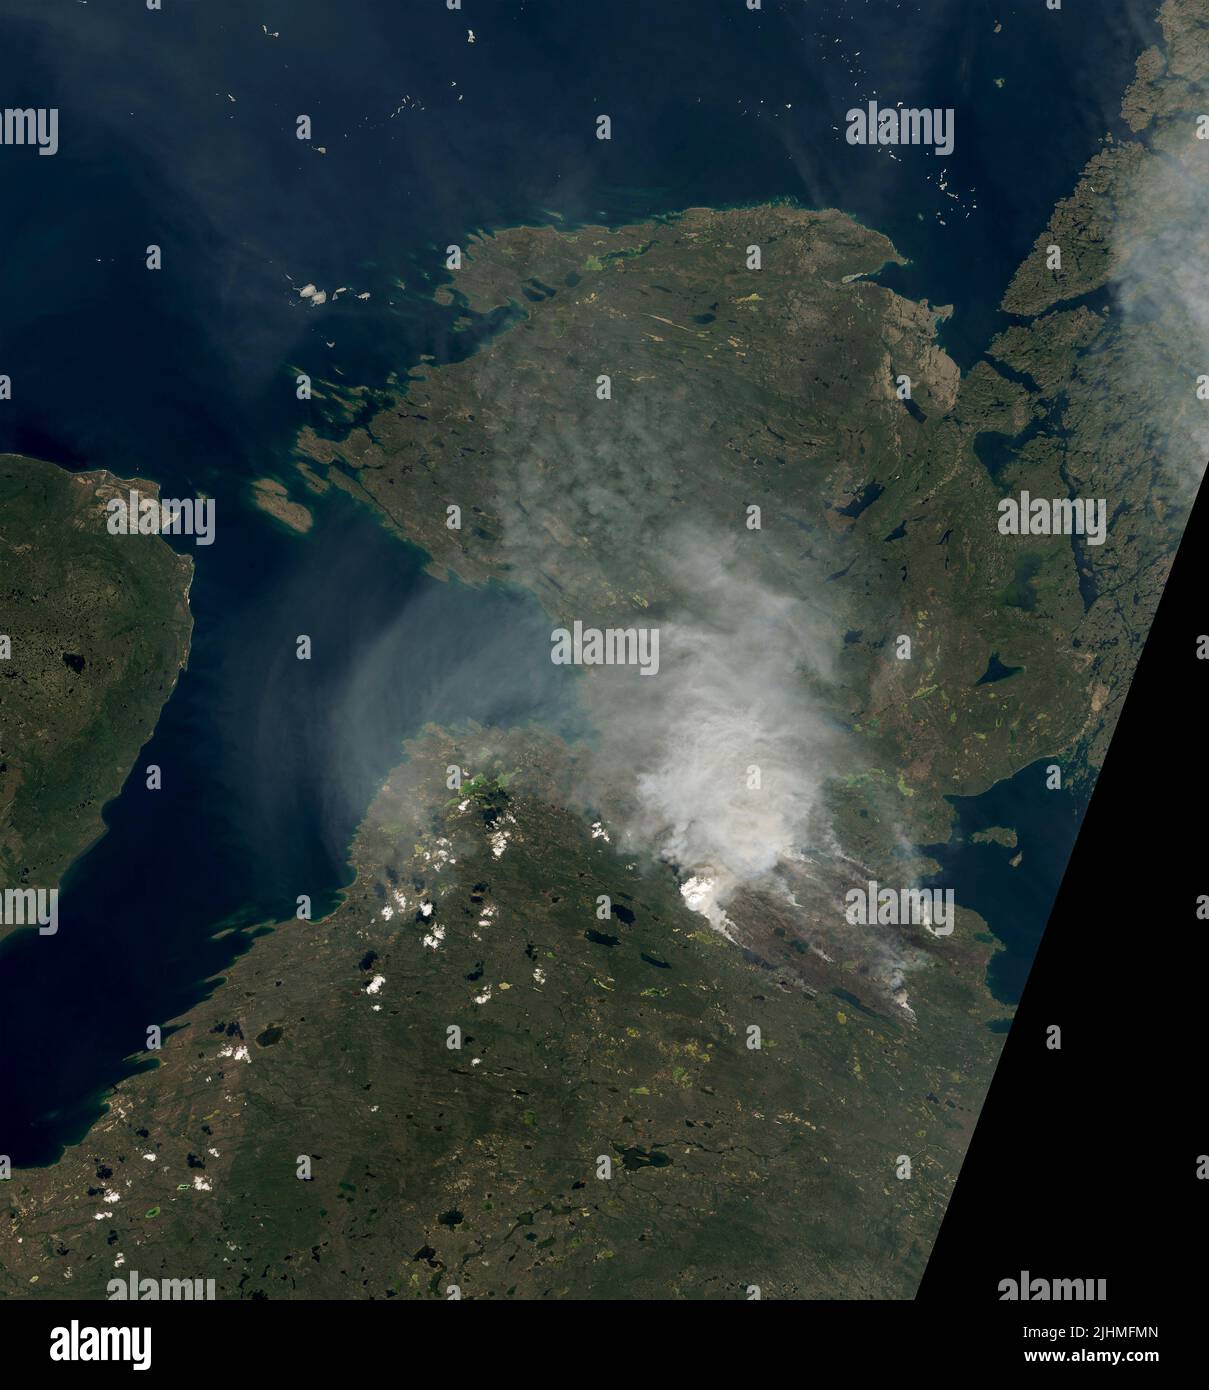 A satellite image showing smoke from wildfires burning near Great Bear Lake in the Northwest Territories of Canada, detected by the NASA Landsat 8 Satellite, July 6, 2022, in Earth Orbit. According to the Canadian government, 136 fires were burning in the Yukon and 65 in the Northwest Territories. Stock Photo